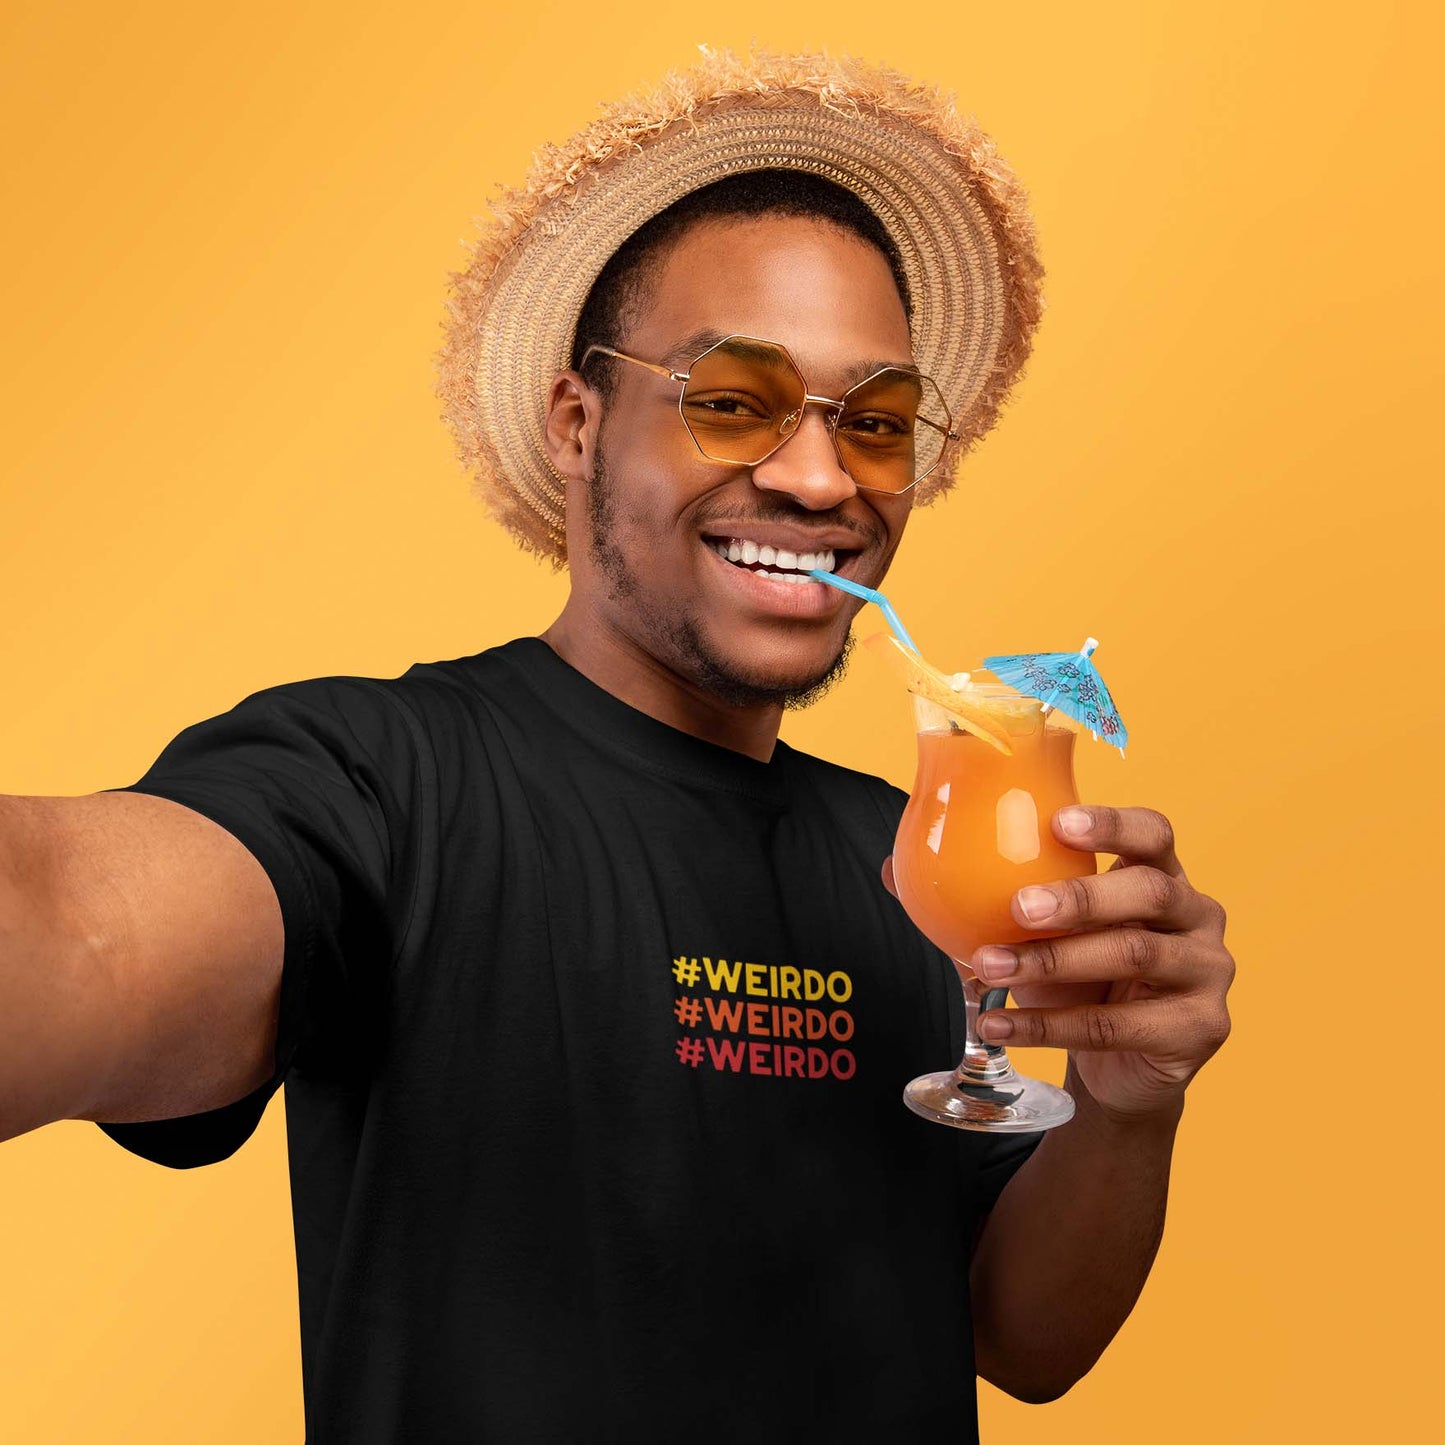 man drinking a cocktail and wearing a black t-shirt with #WEIRDO meme embroidery at the front of t-shirt. Alternative fashion brand for weirdos.